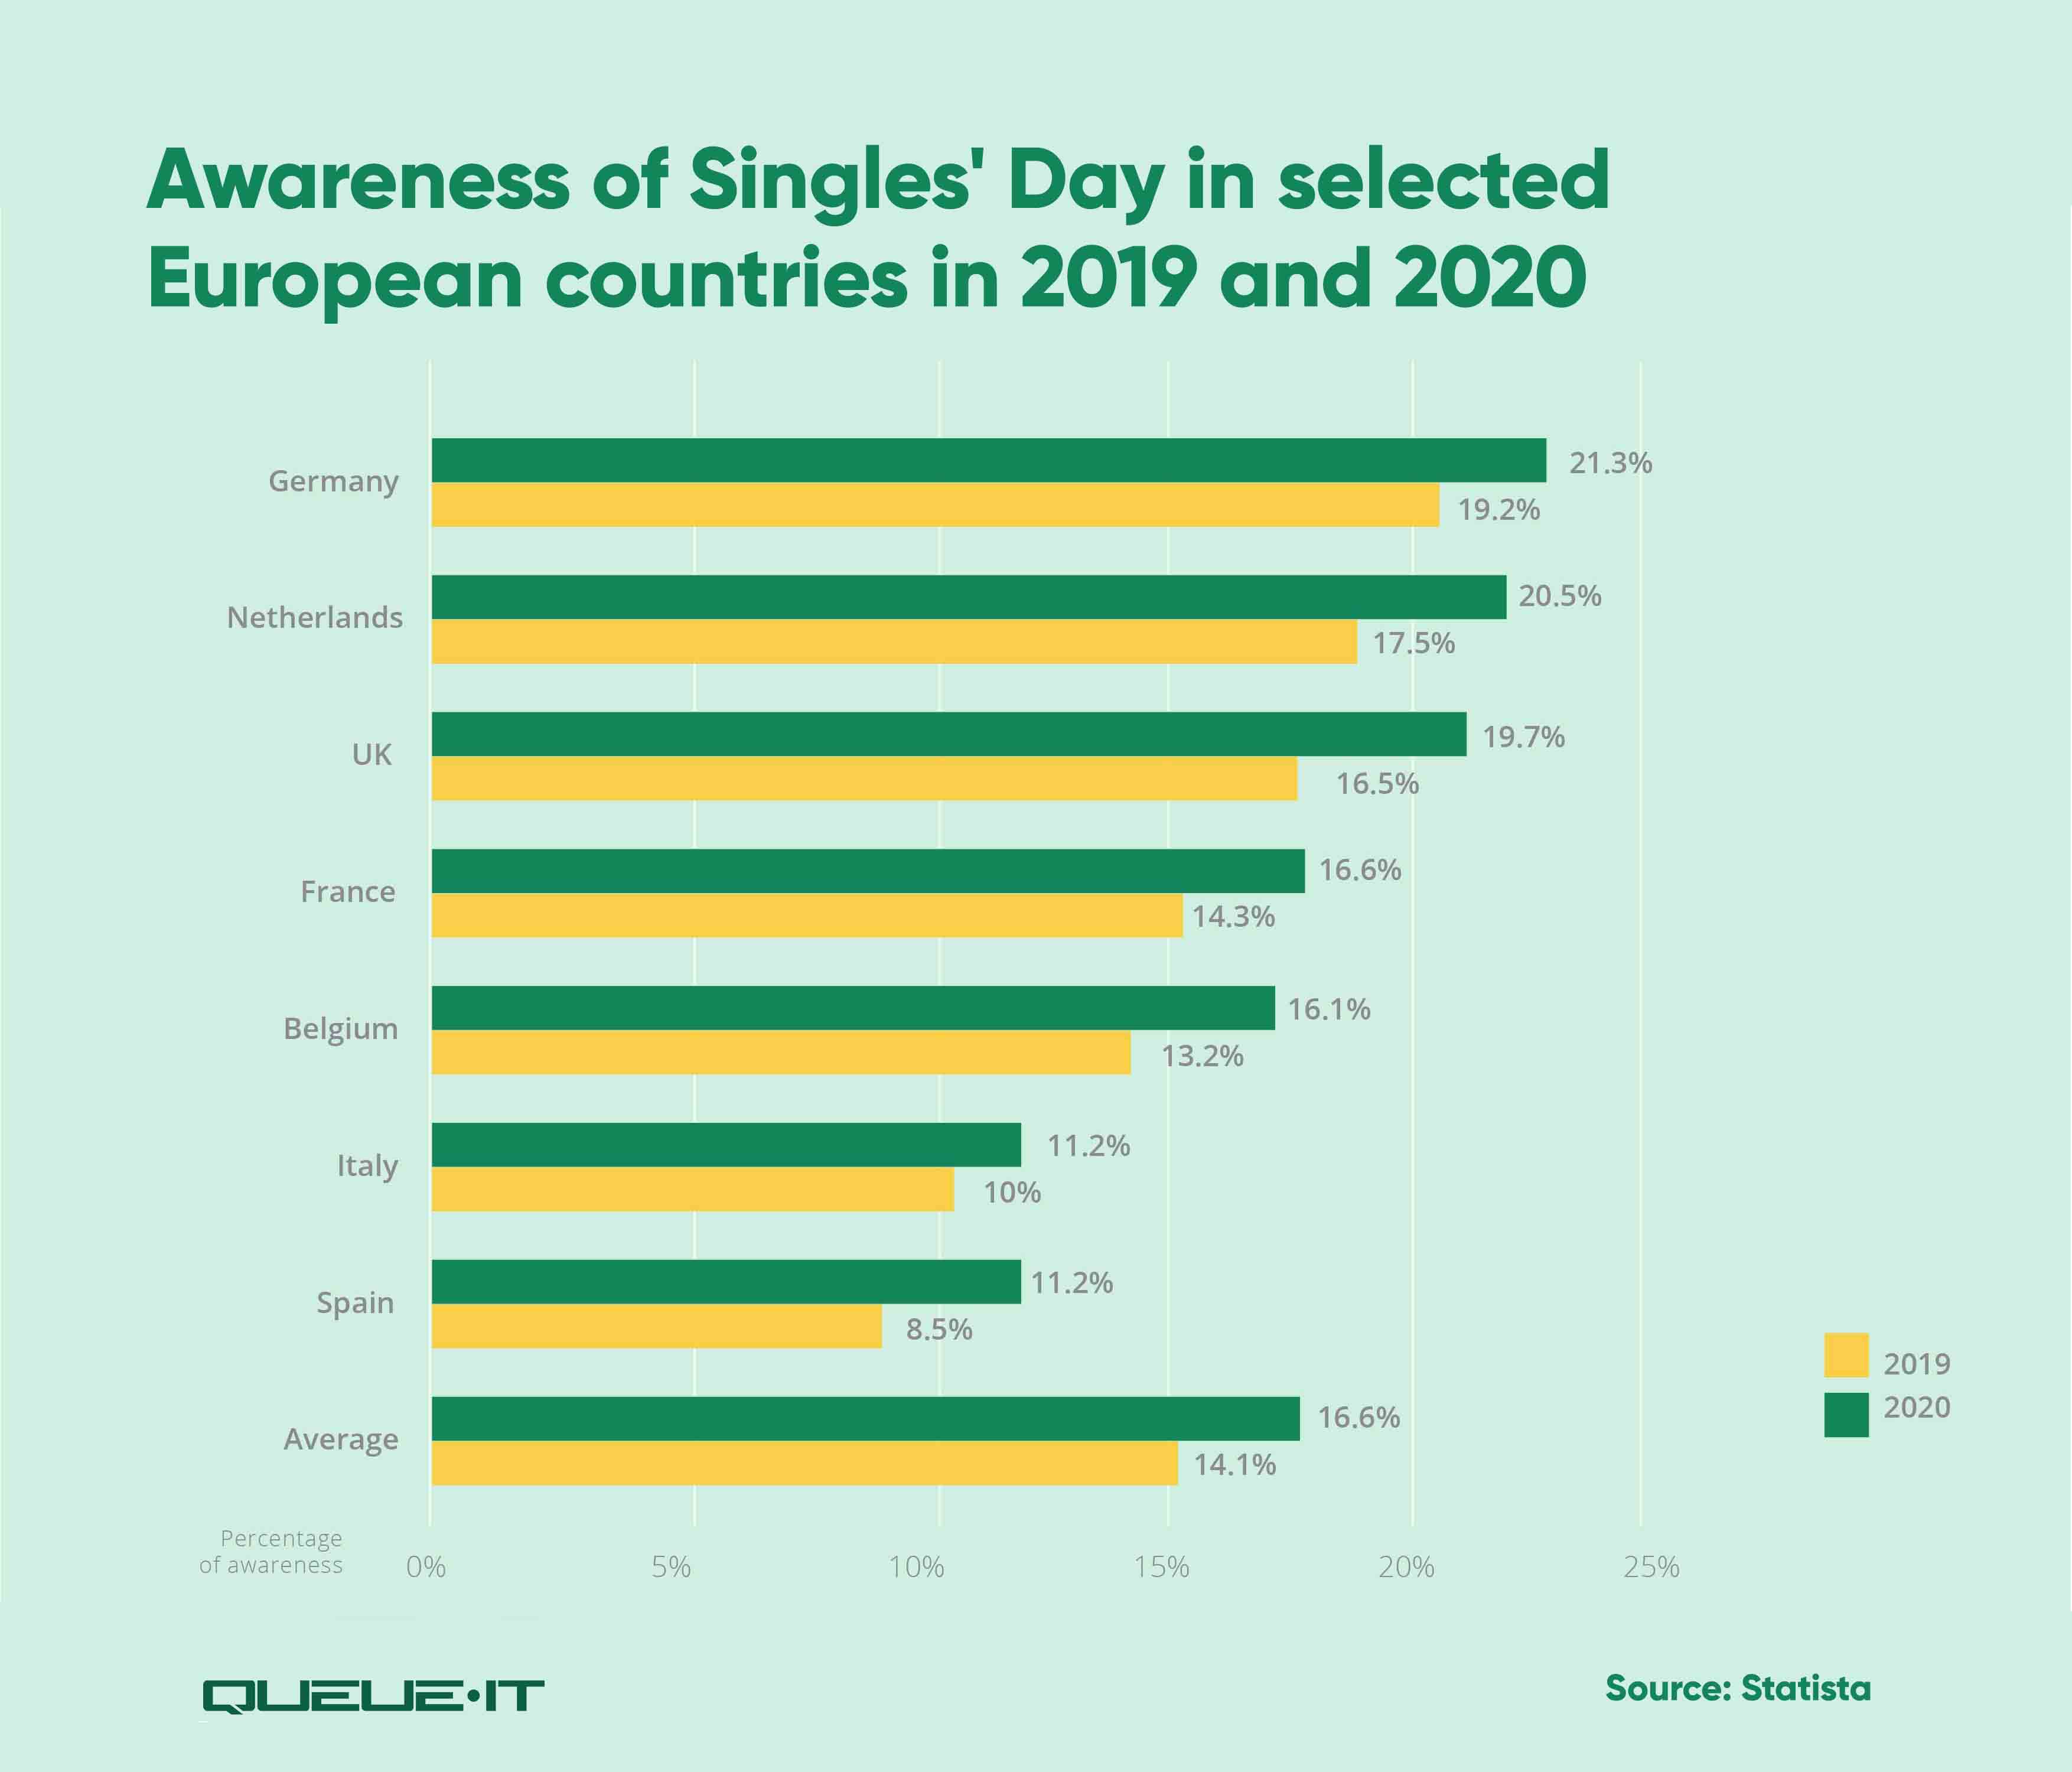 Awareness of Singles' Day in European countries 2019-2020